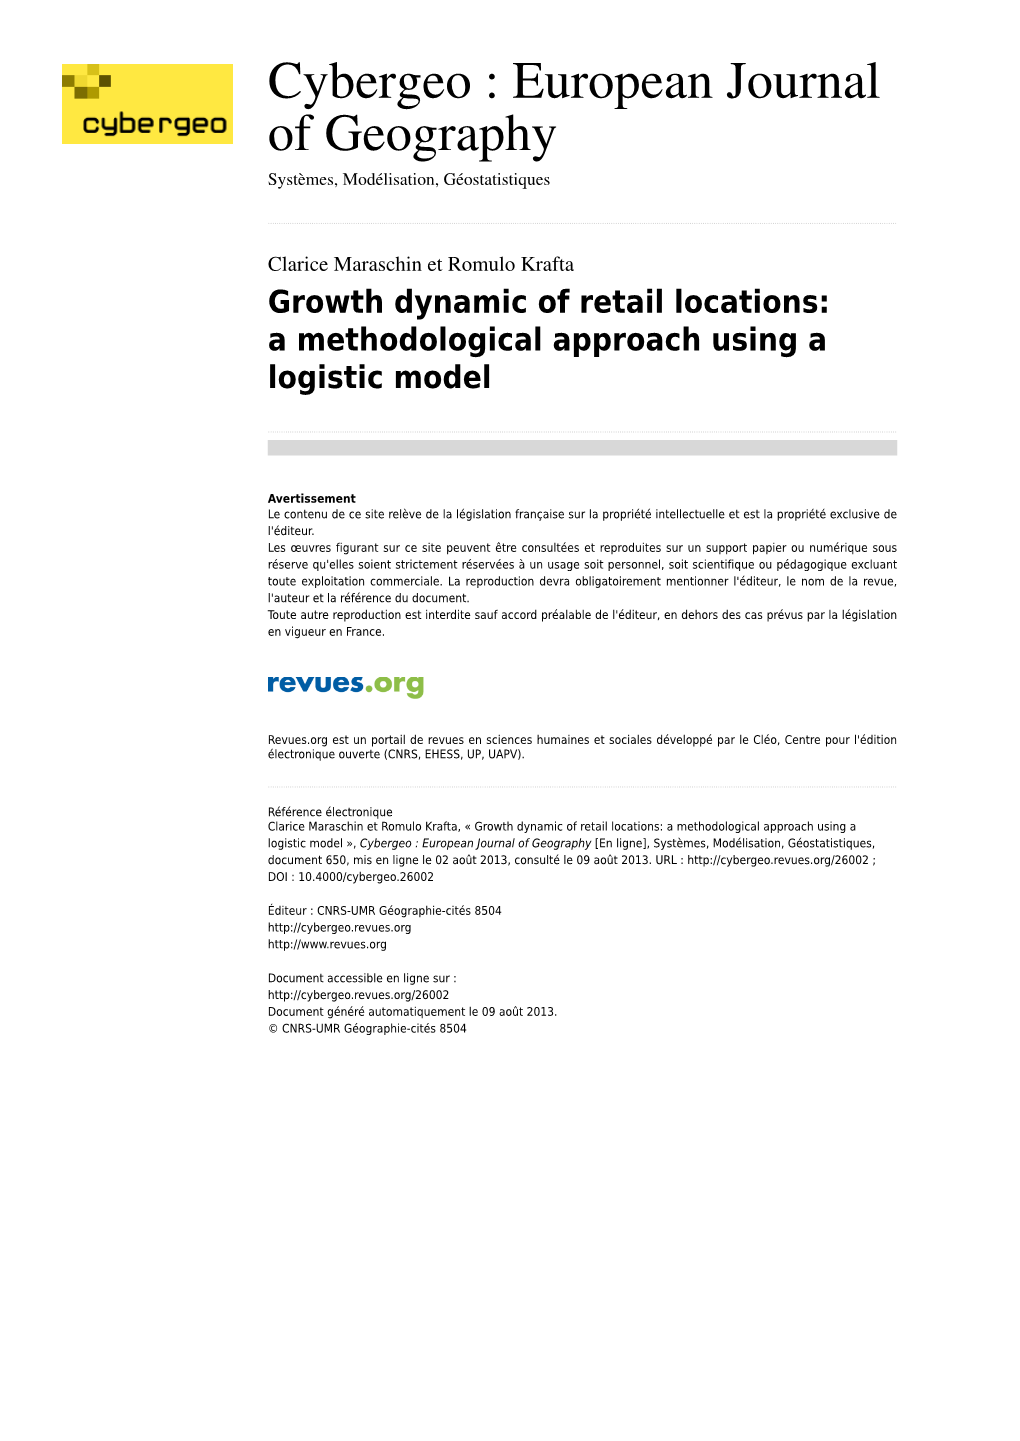 Growth Dynamic of Retail Locations: a Methodological Approach Using a Logistic Model